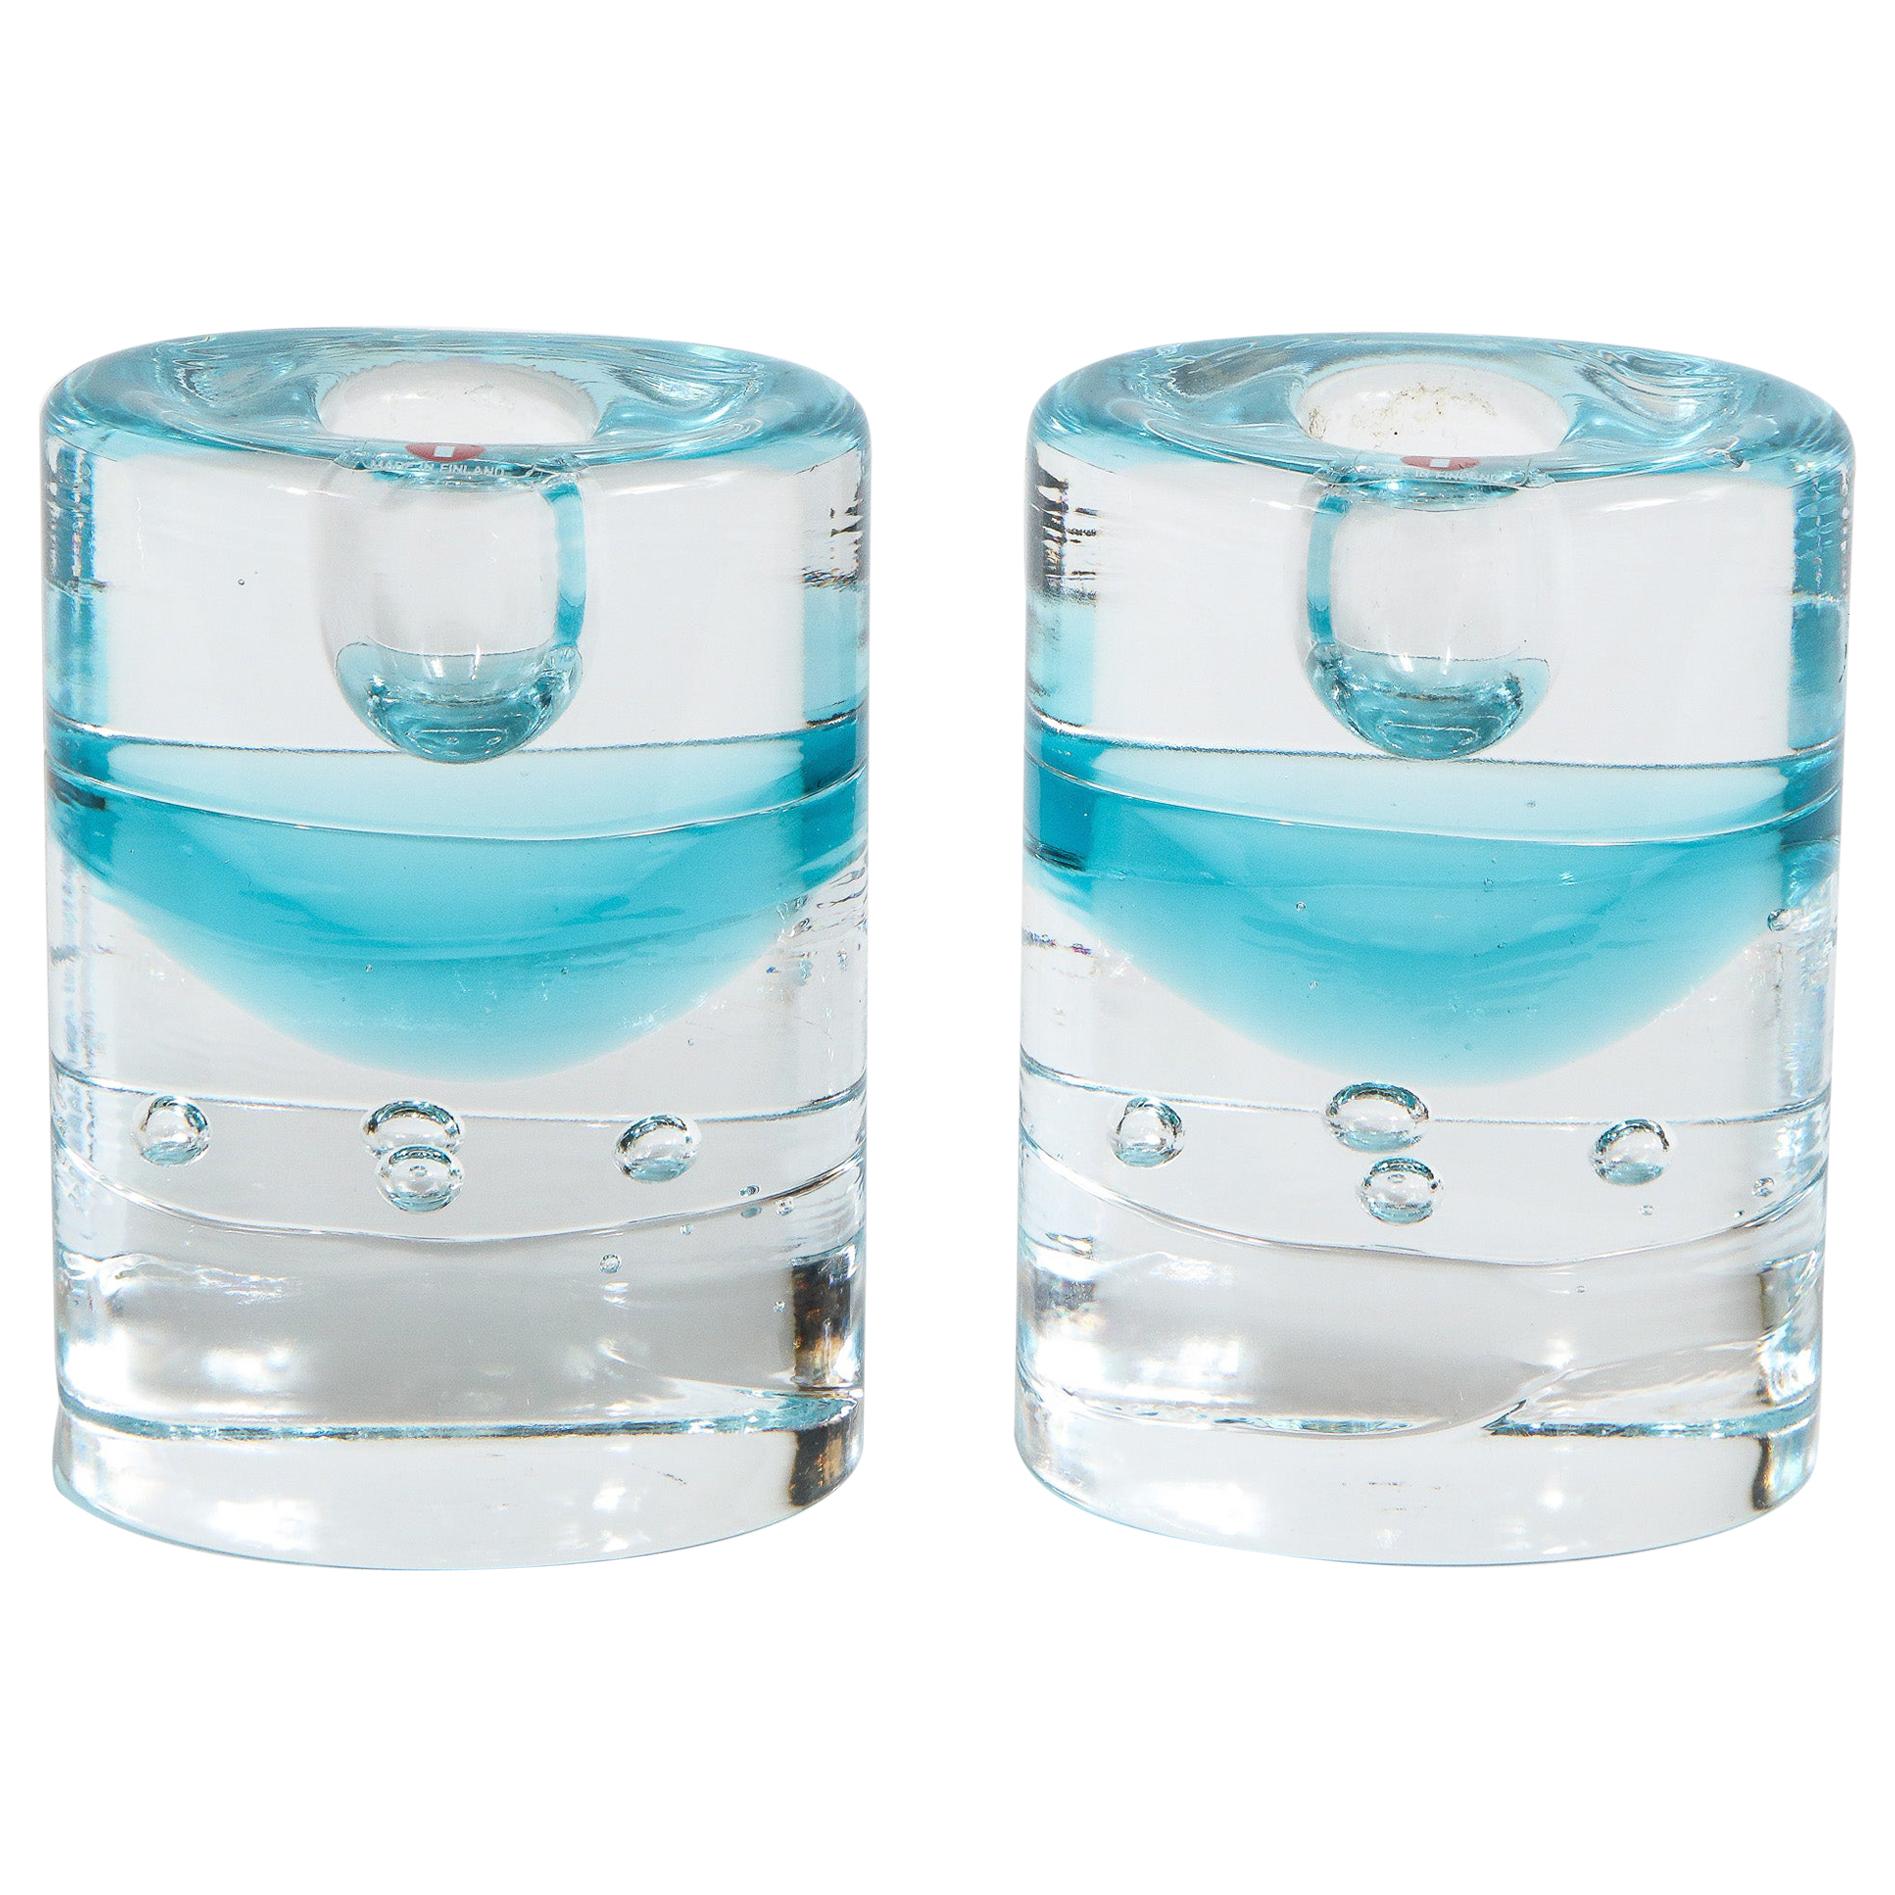 Pair of Modernist Candlesticks in Translucent and Acquamarine Glass by Littala For Sale